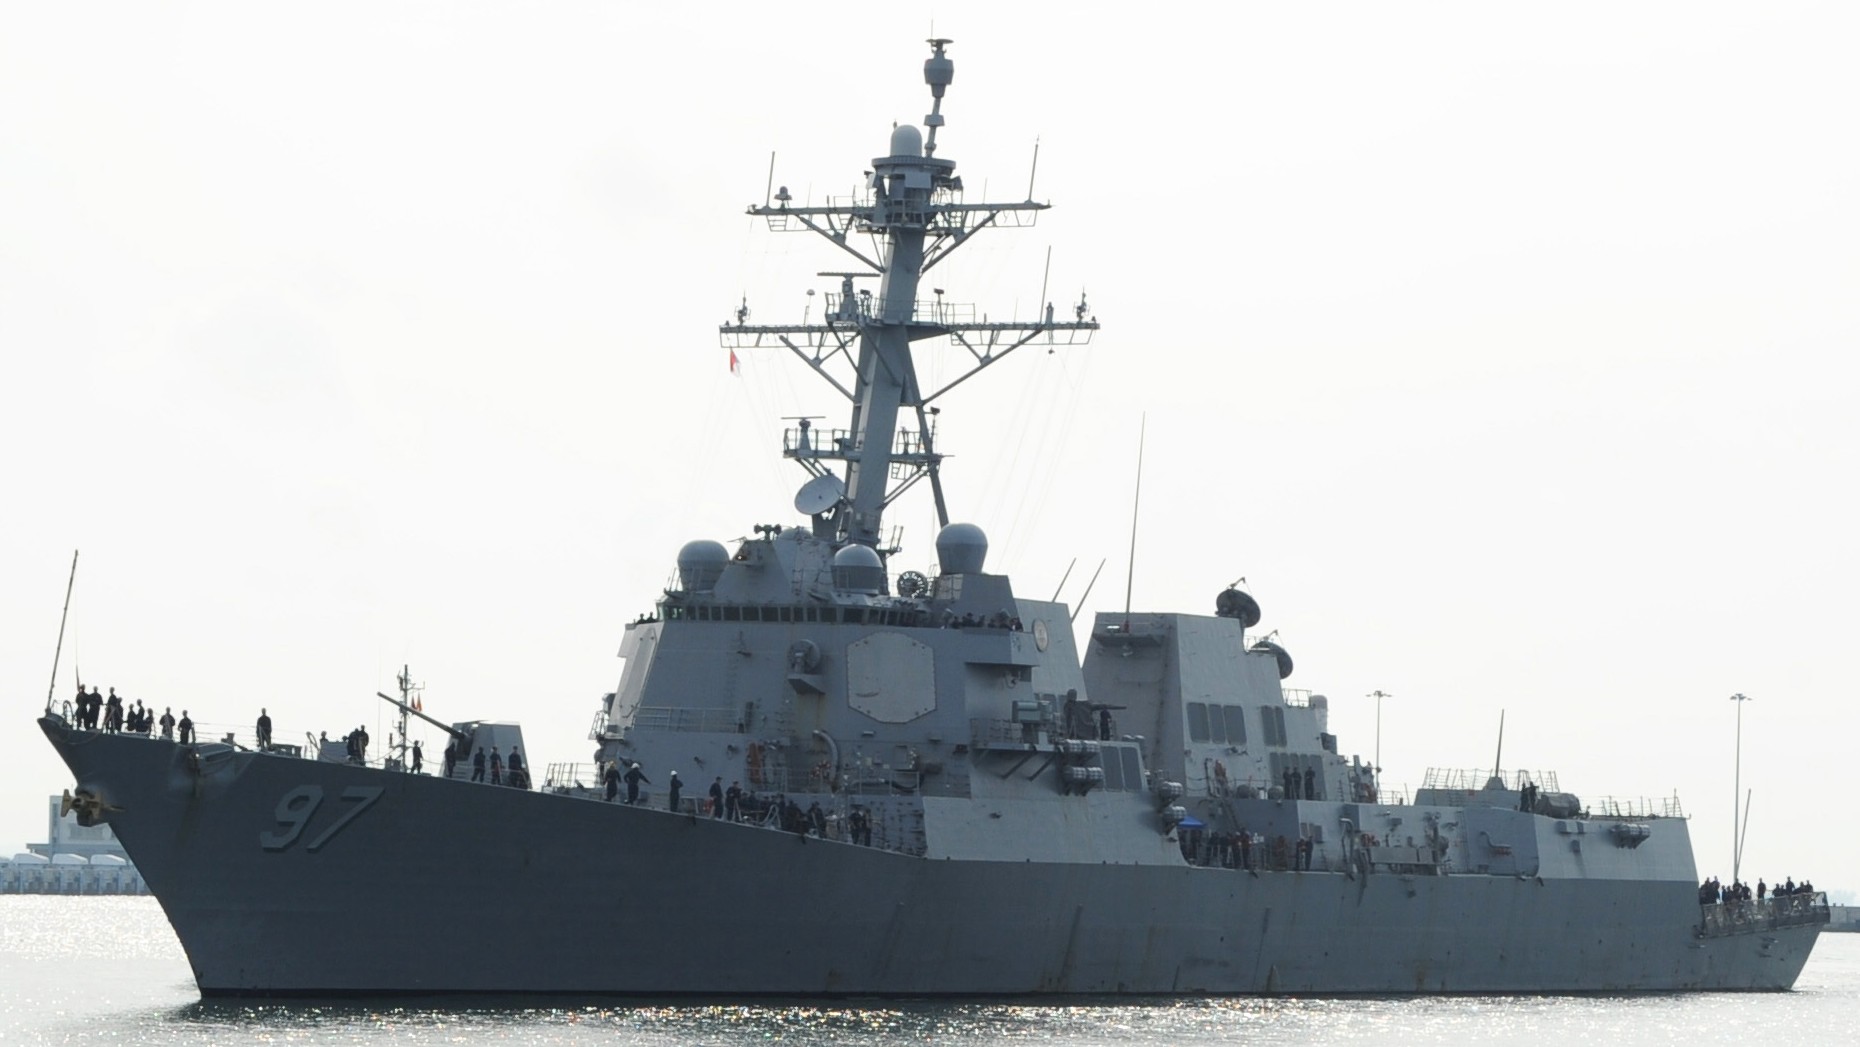 ddg-97 uss halsey arleigh burke class guided missile destroyer aegis us navy changi singapore 35